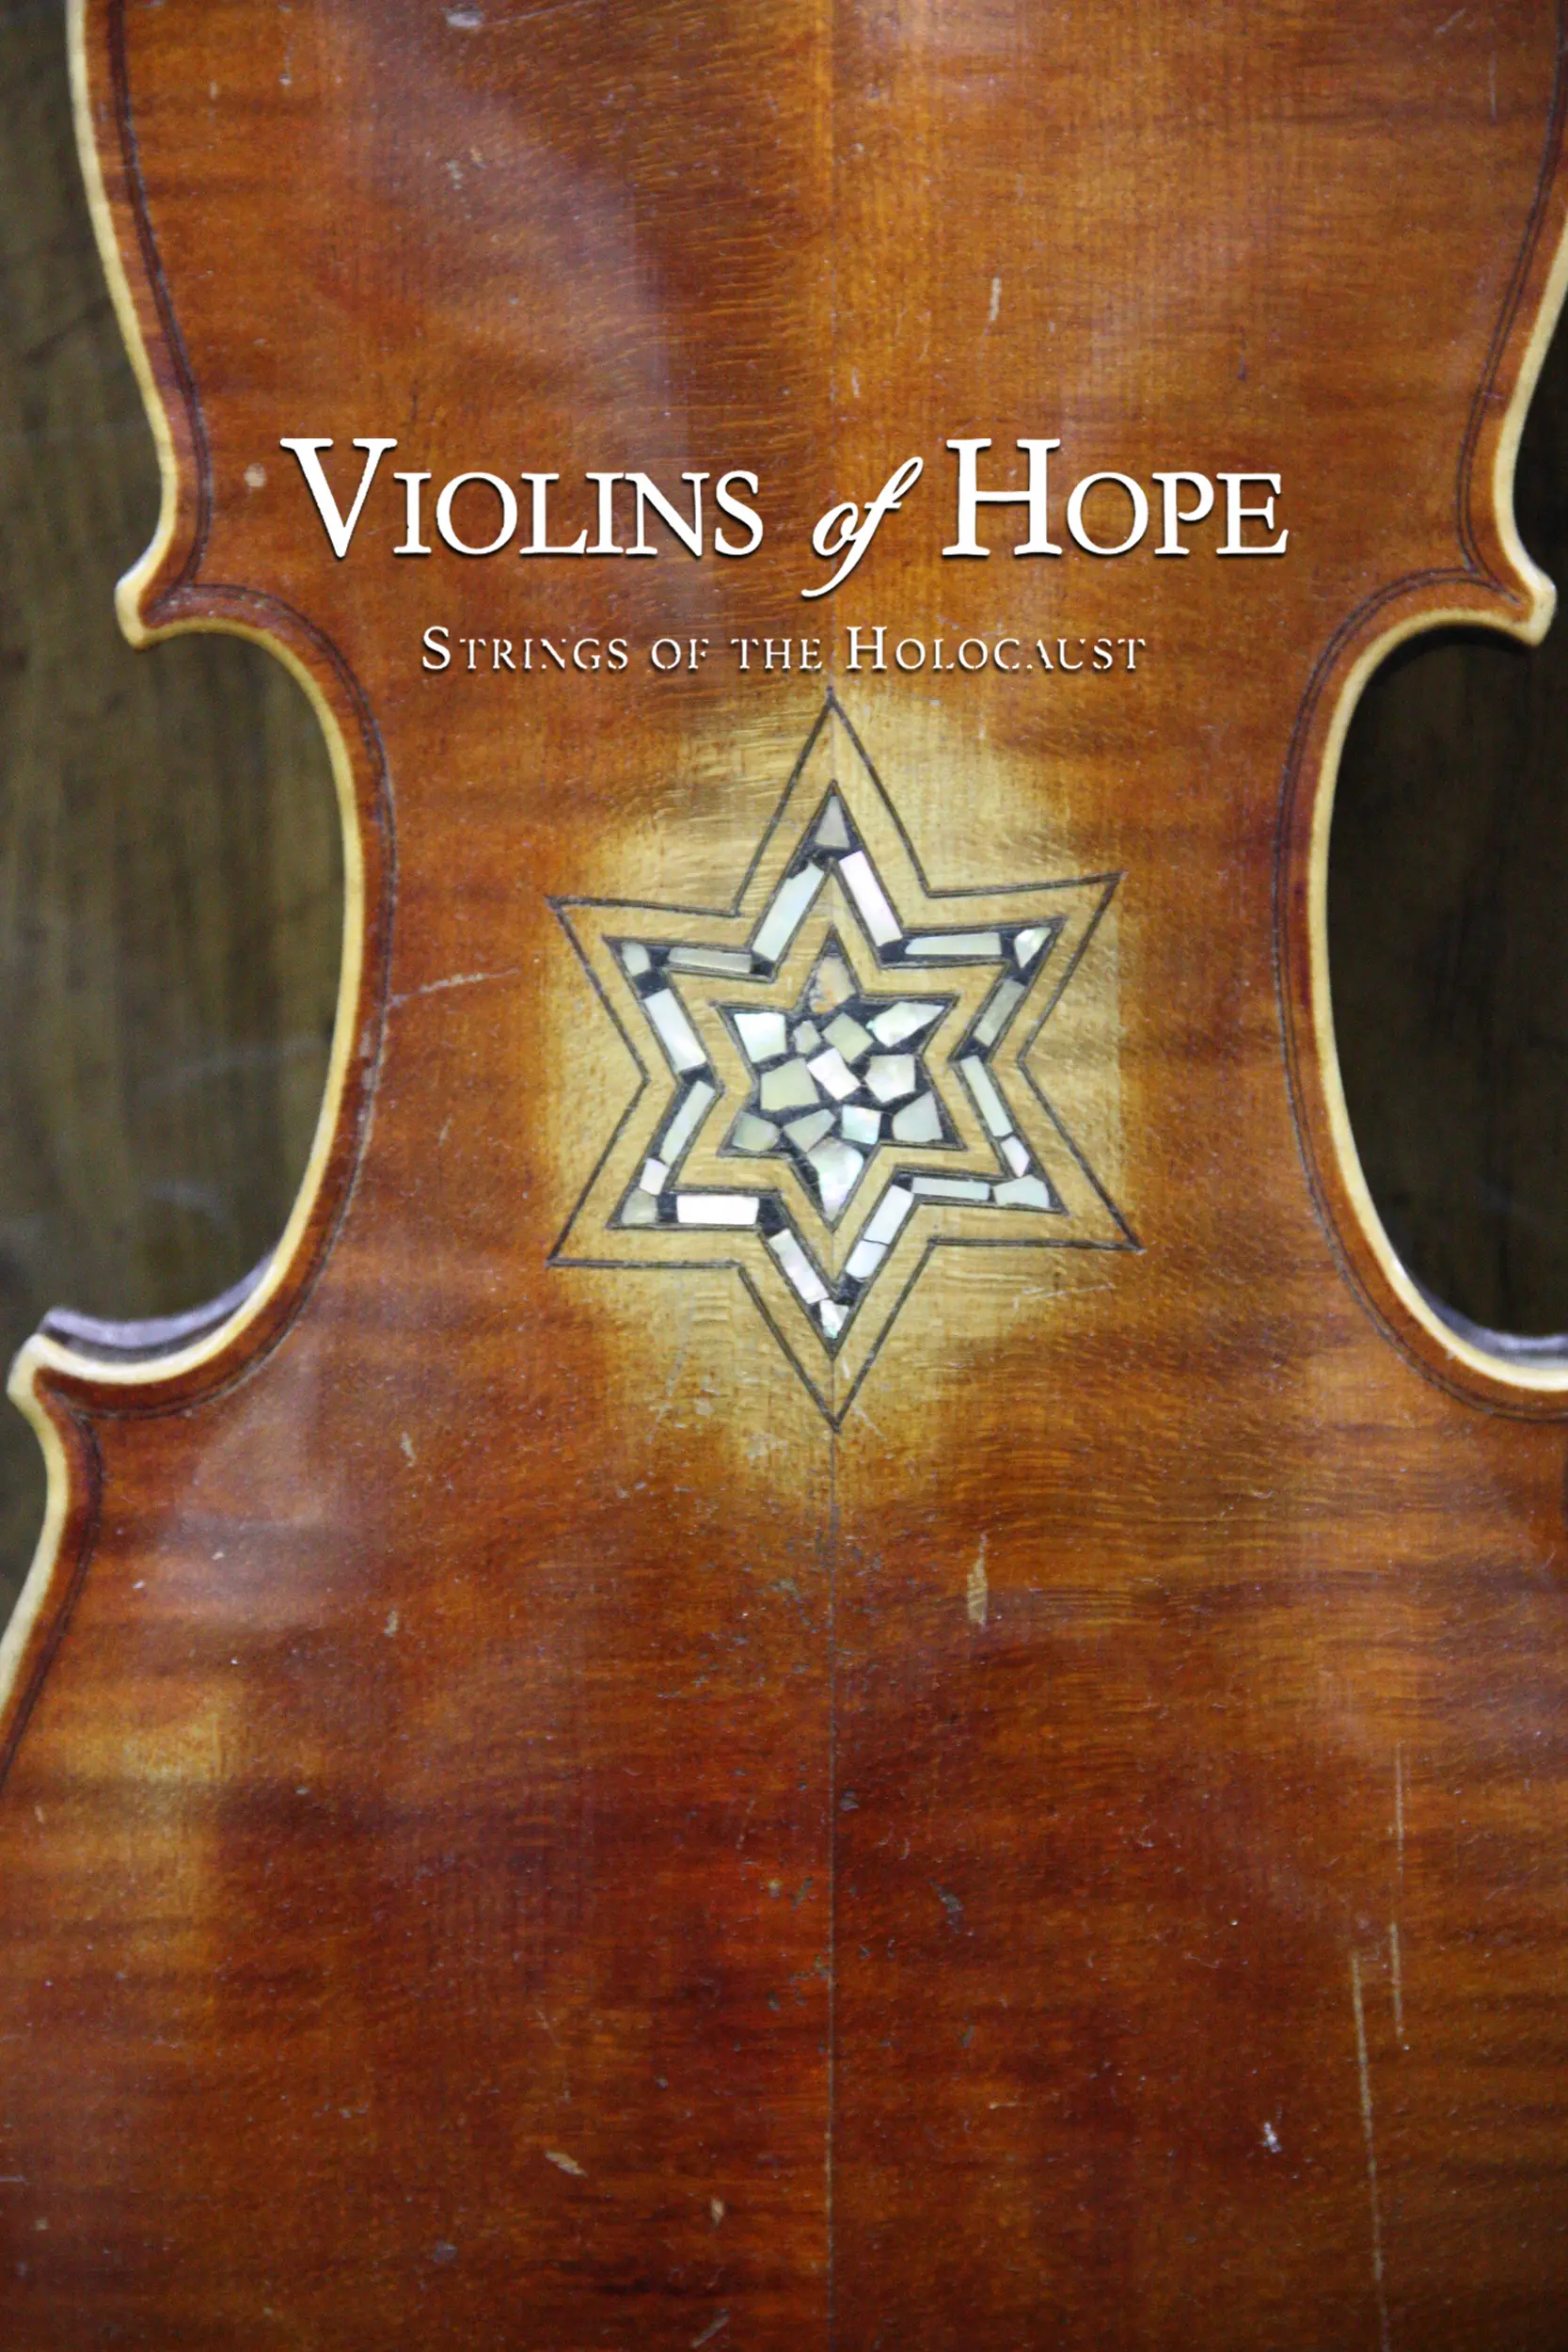 violins of hope documentary - Where can I watch Violins of Hope